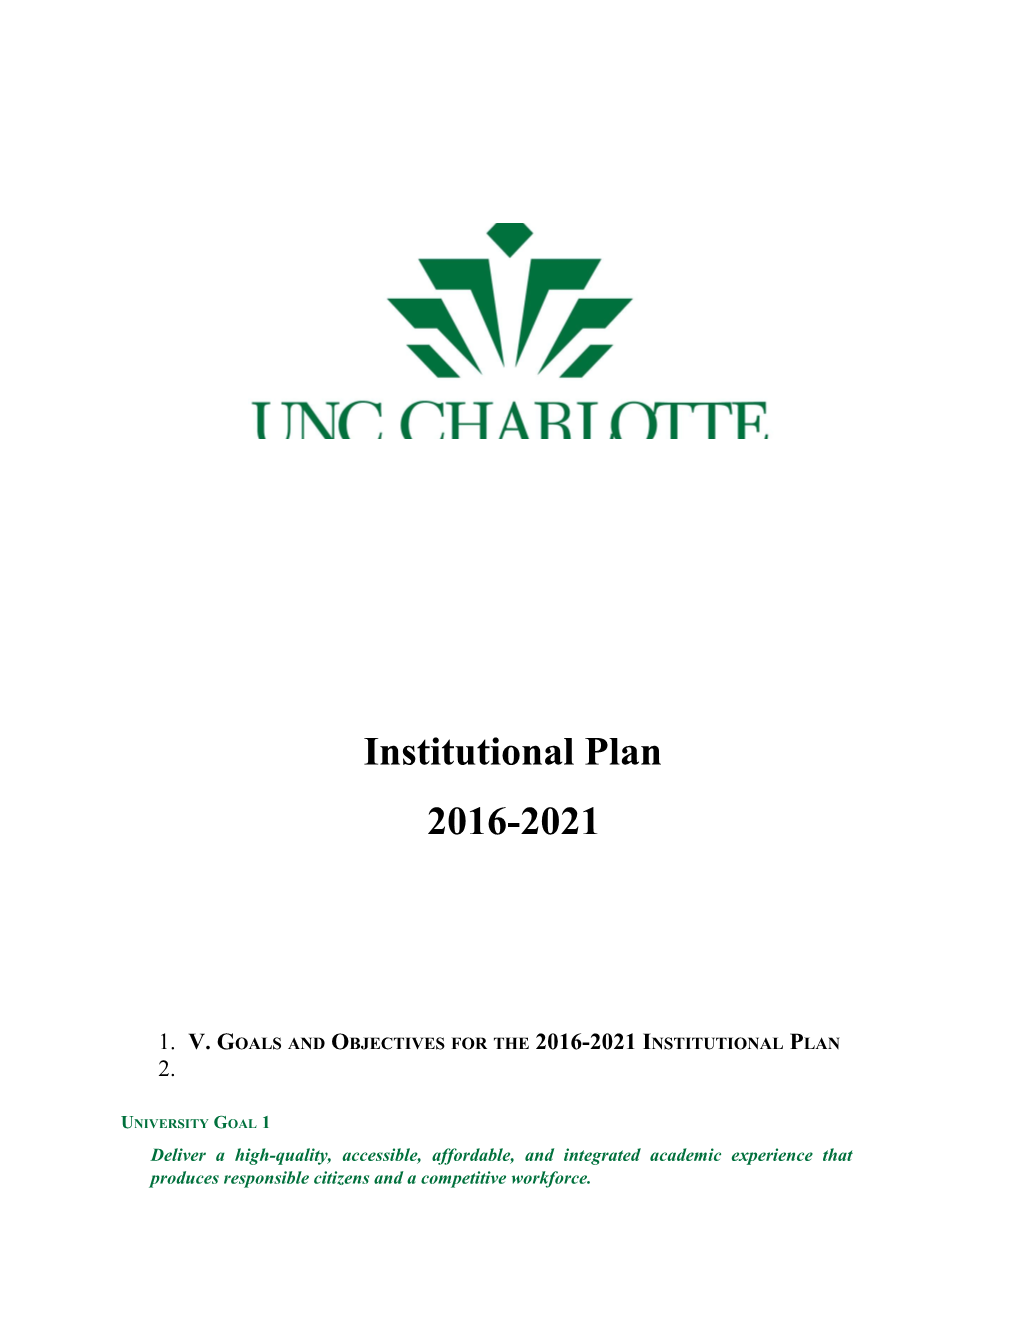 V. Goals and Objectives for the 2016-2021 Institutional Plan